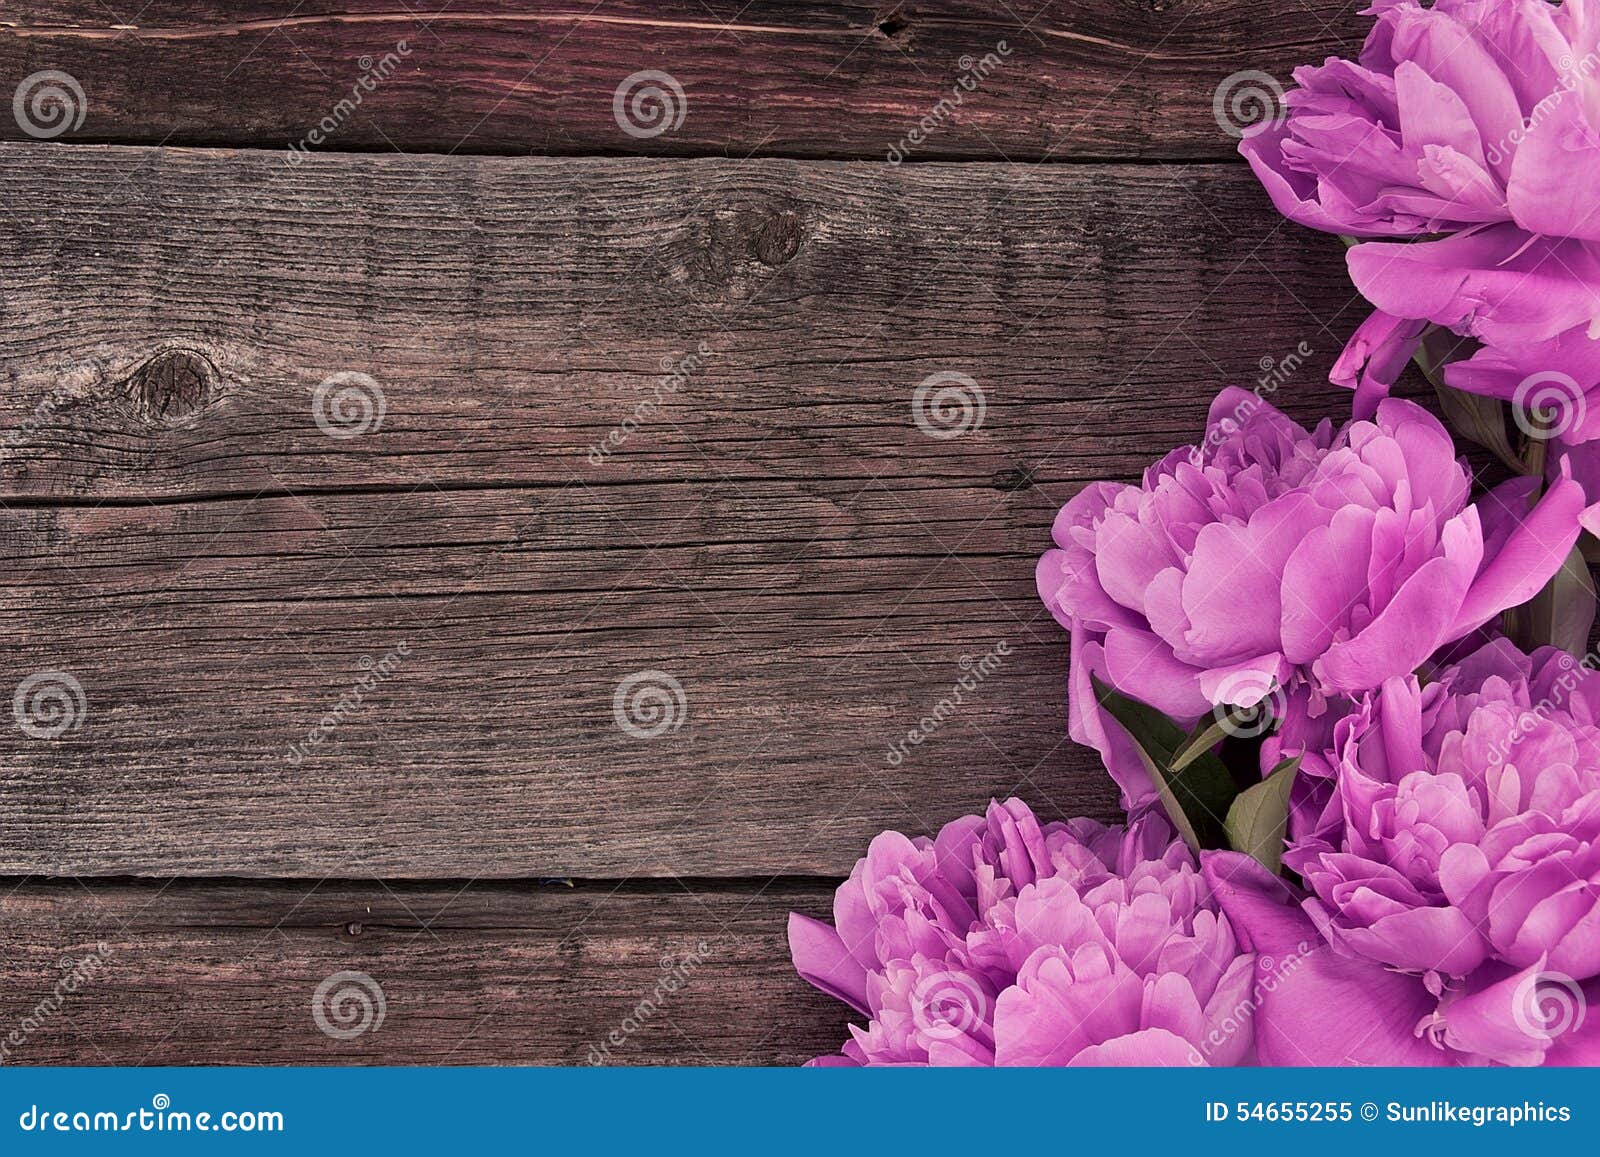 Pink Peony Flower On Dark Rustic Wooden Background With ...